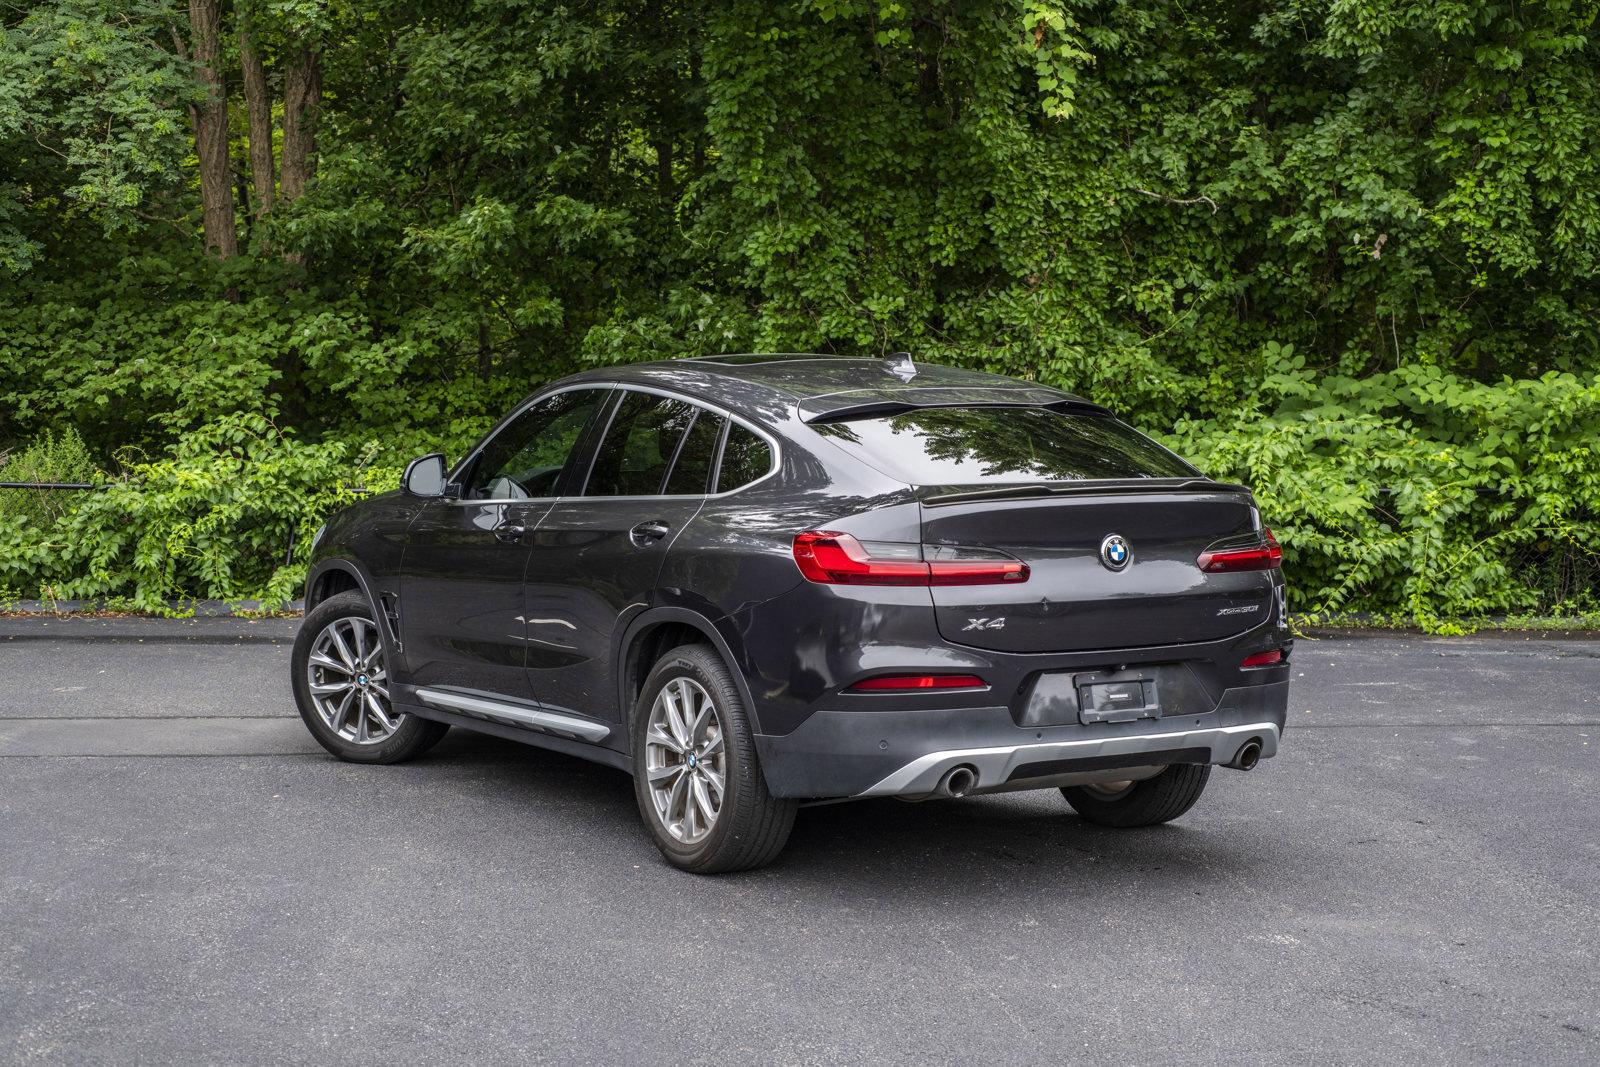 Used 2019 BMW X4 30i with VIN 5UXUJ3C57KLG57615 for sale in Norwood, MA